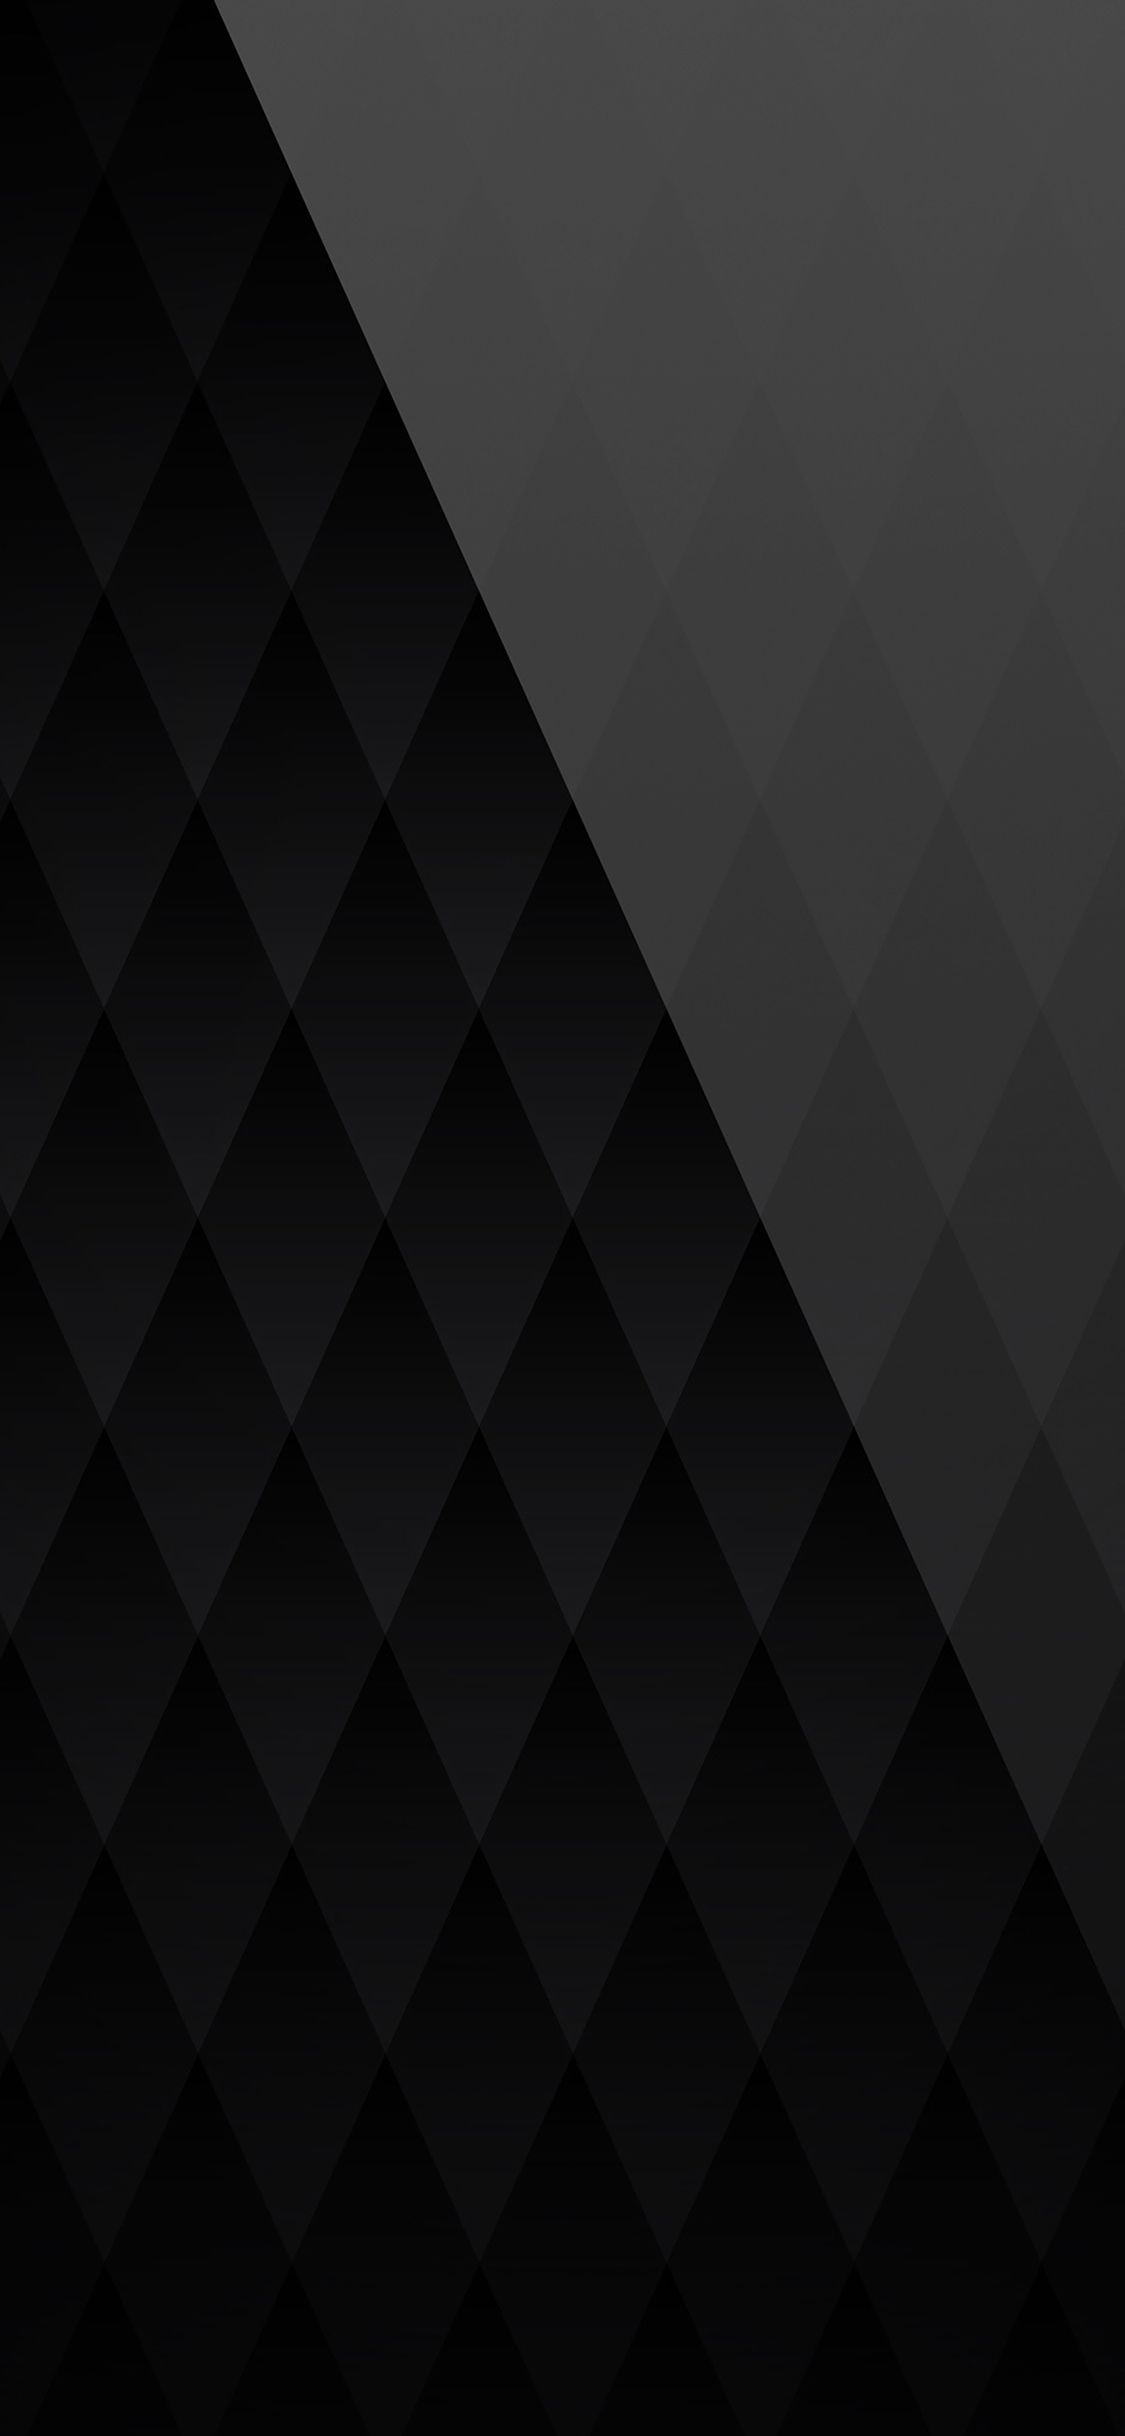 Black Diamond Wallpaper Hd For Mobile : Default wallpapers which comes ...